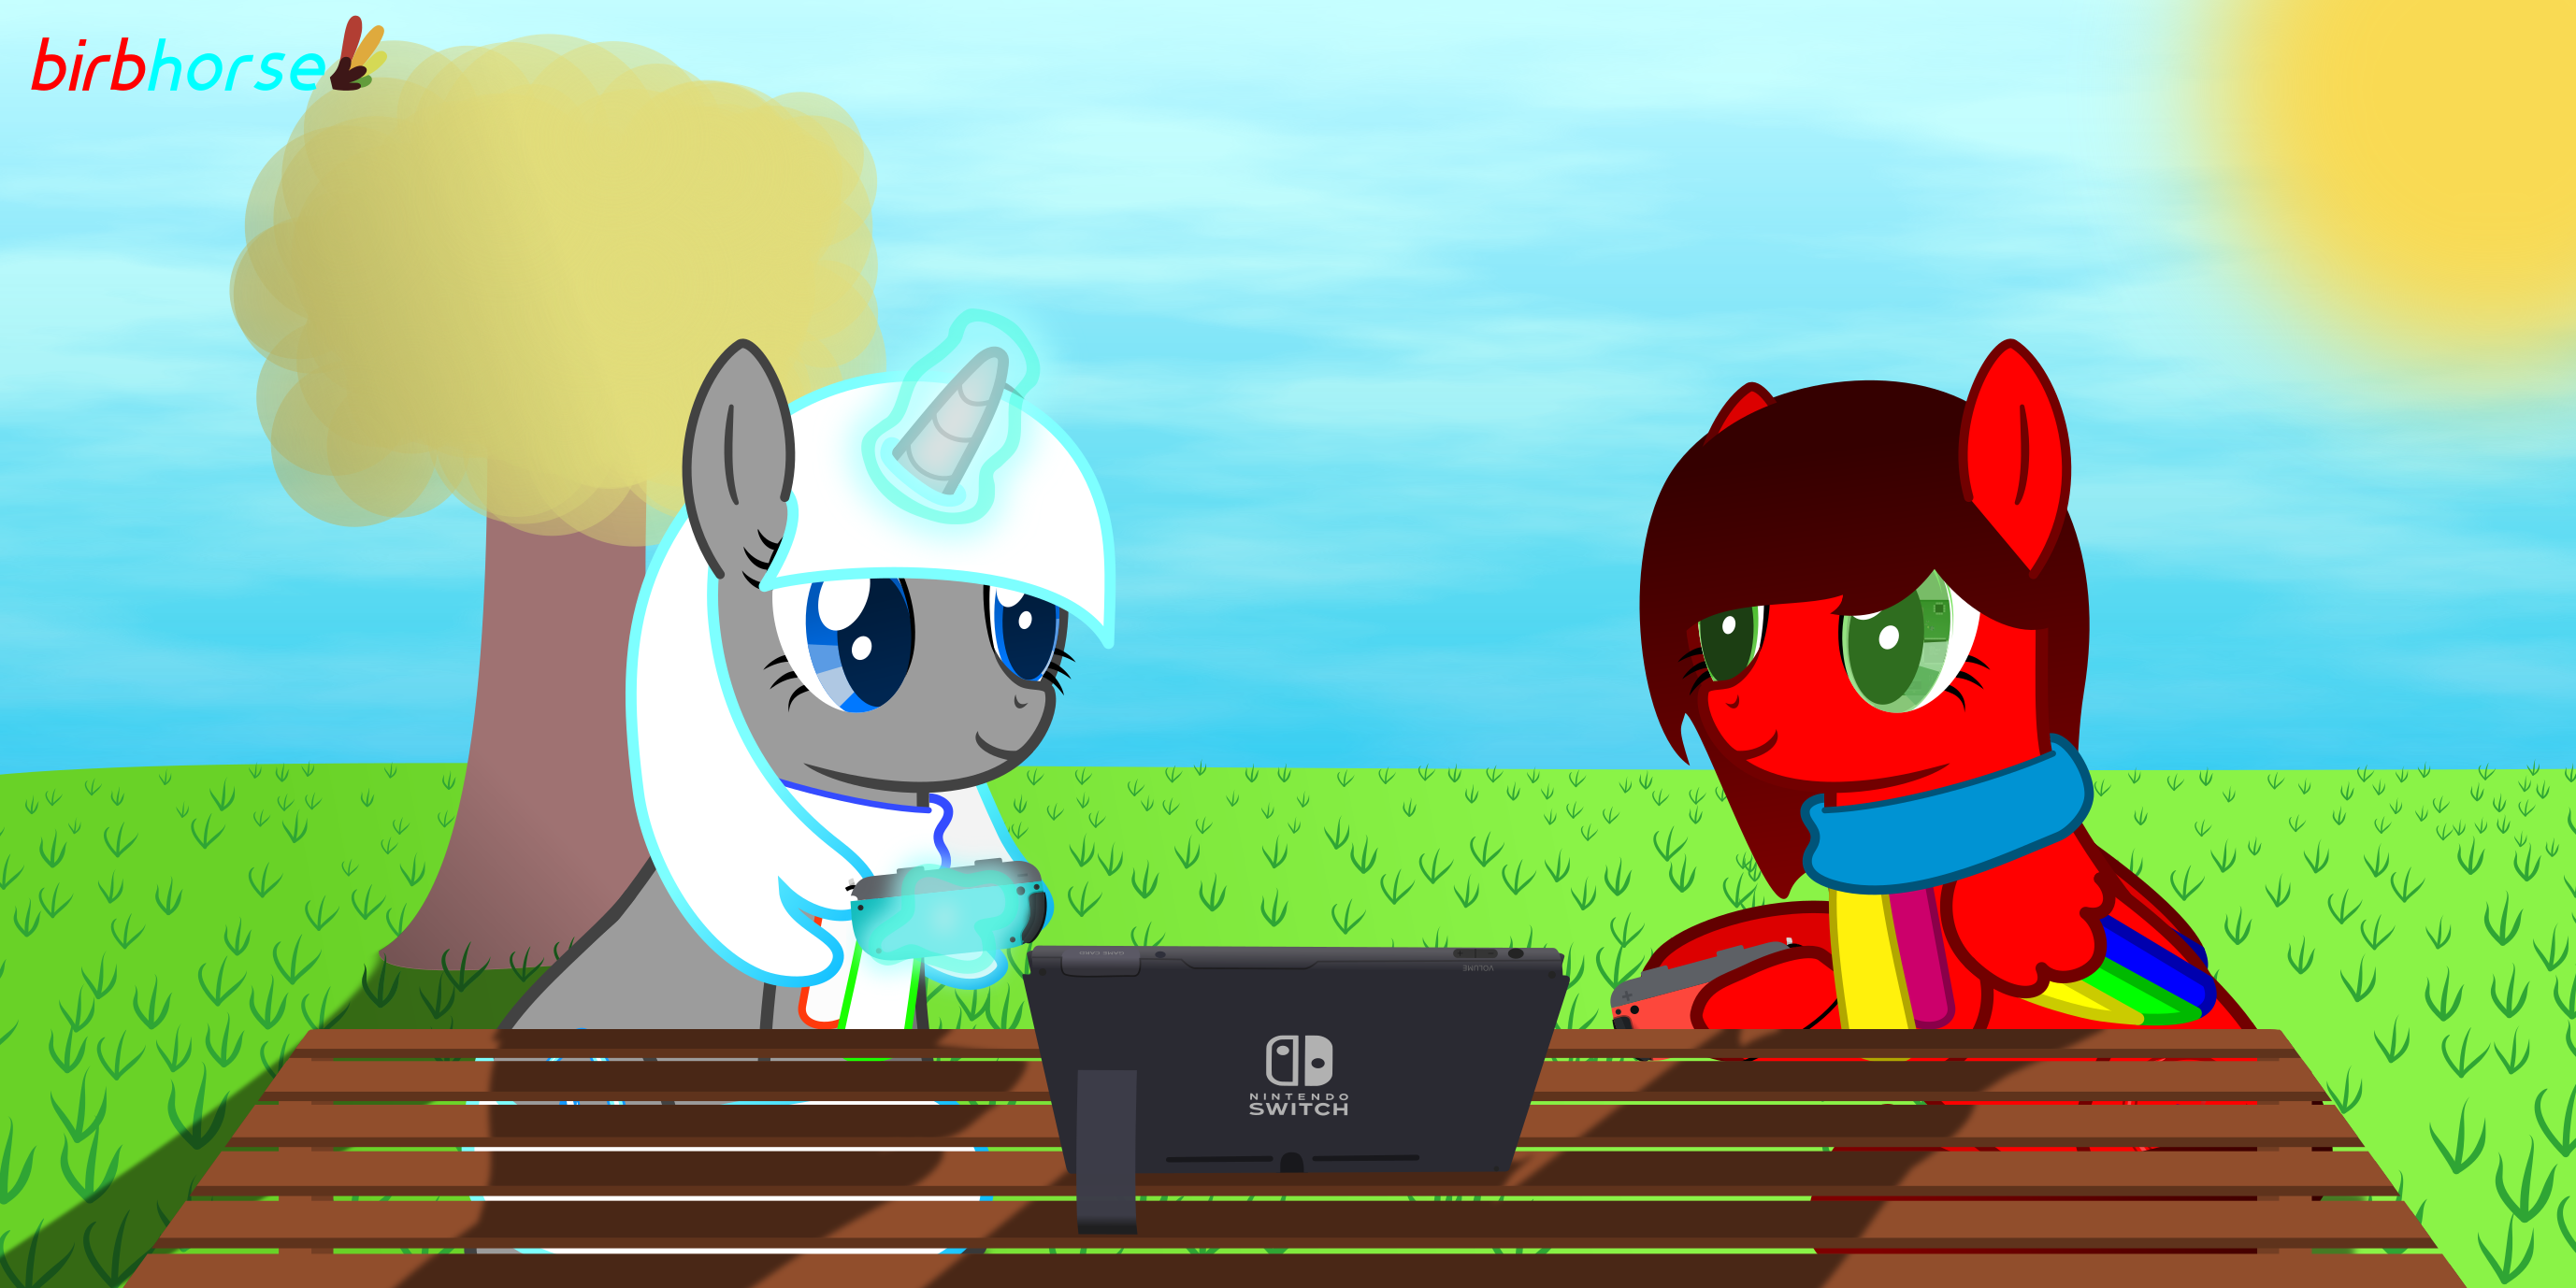 A red horse and a grey/neon blue horse are playing a Nintendo Switch in it's tabletop mode.